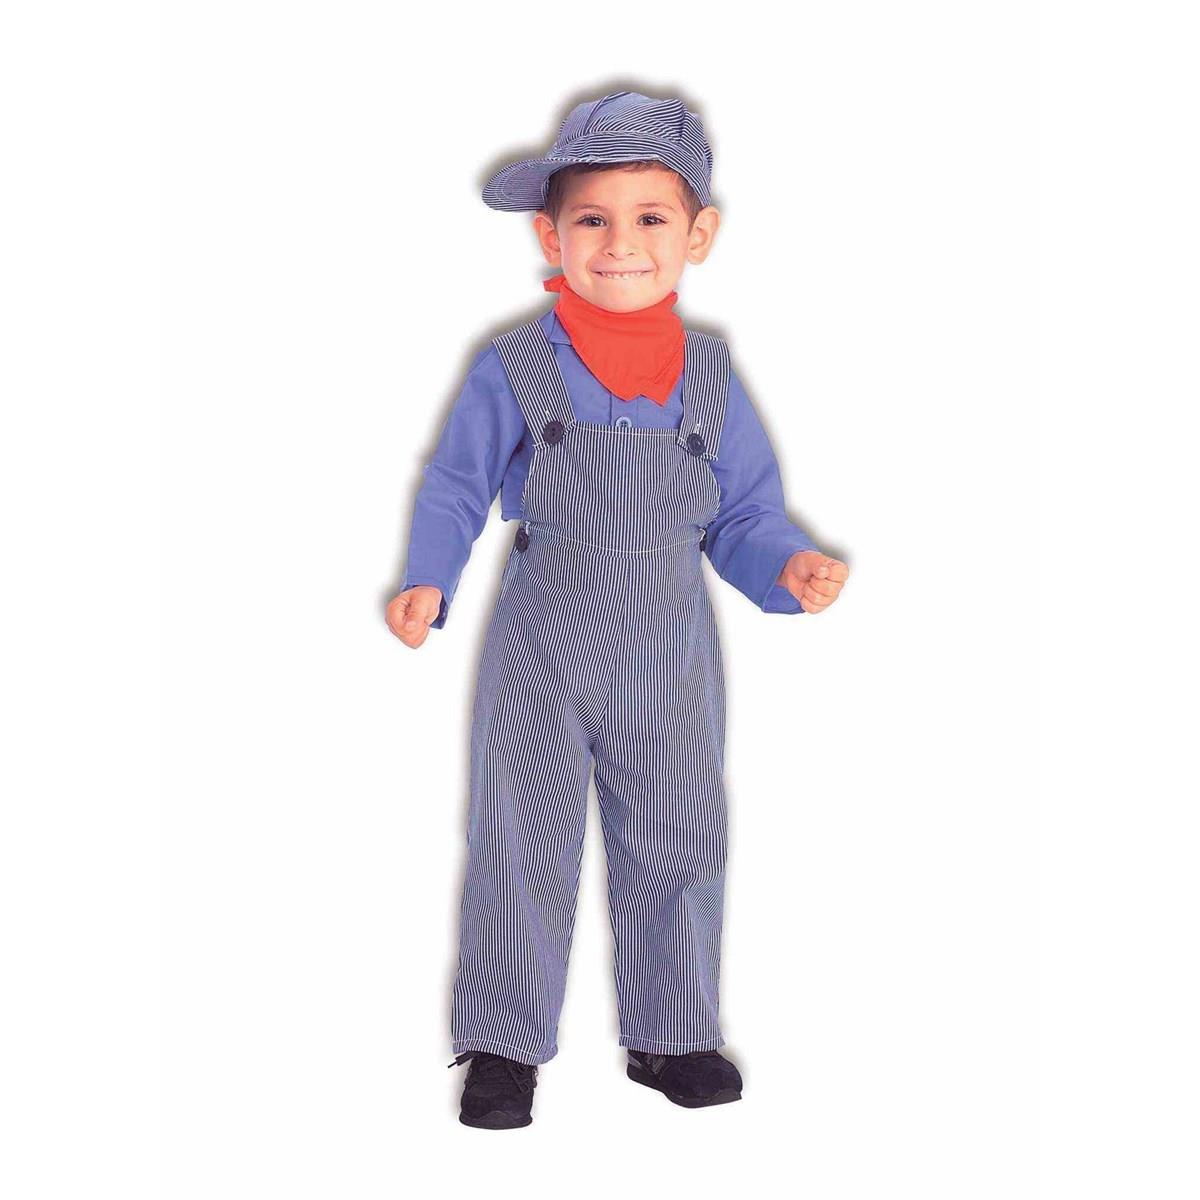 277103 Toddler Boys Lil Engineer Costume, Normal Size